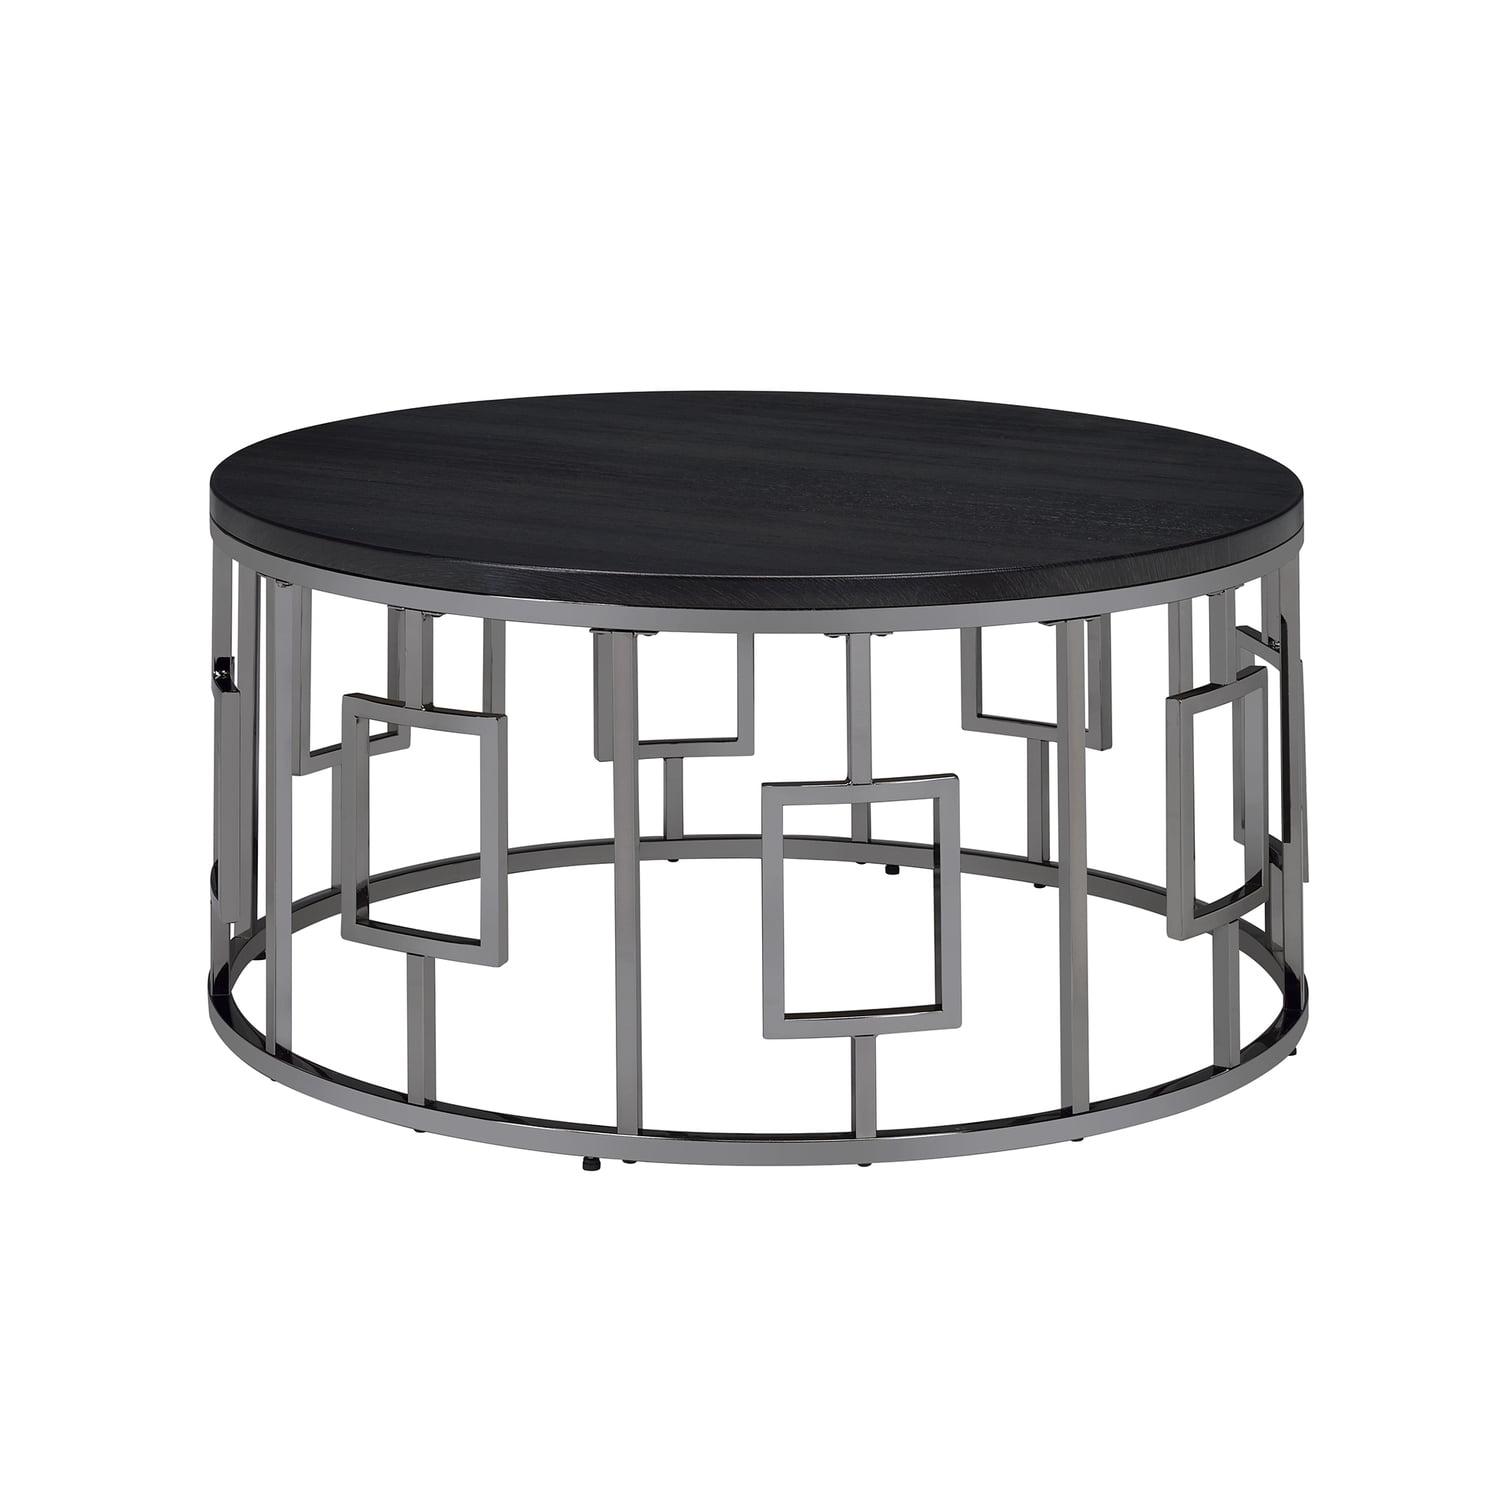 Kendall 36" Round Black Wood and Chrome Coffee Table